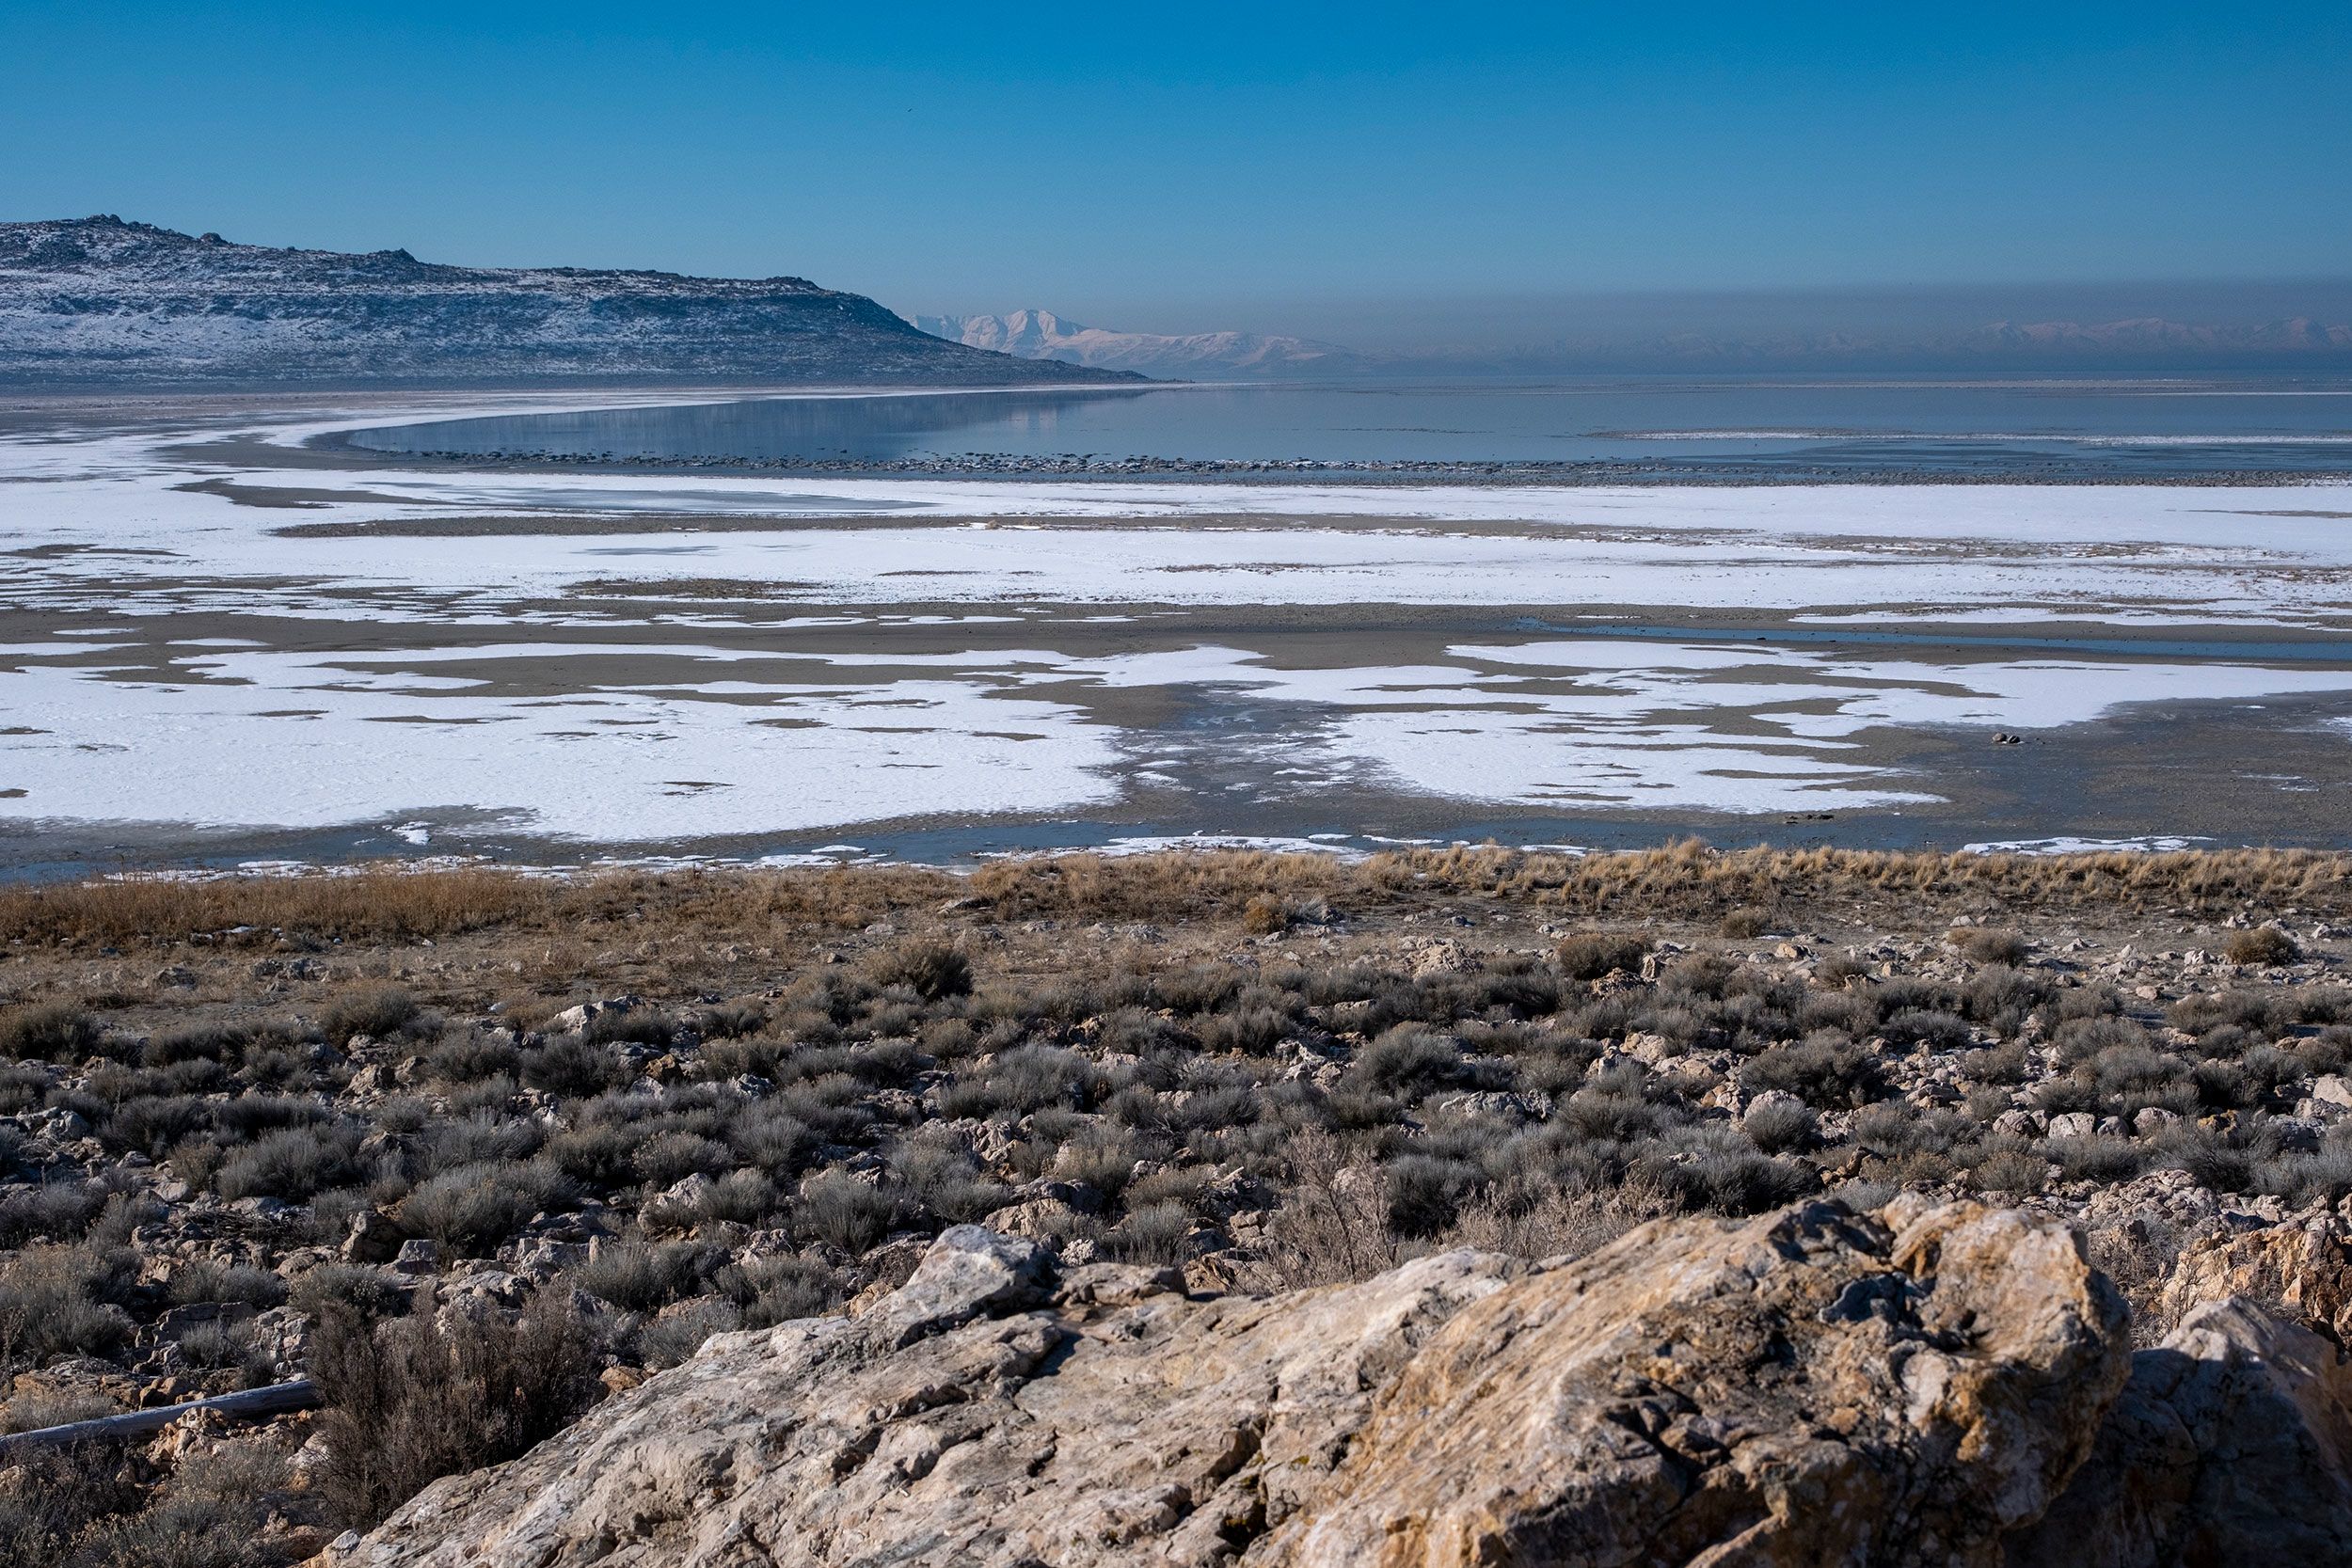 Dust From the Drying Great Salt Lake Is Wreaking Havoc on Utah's Snow, Smart News